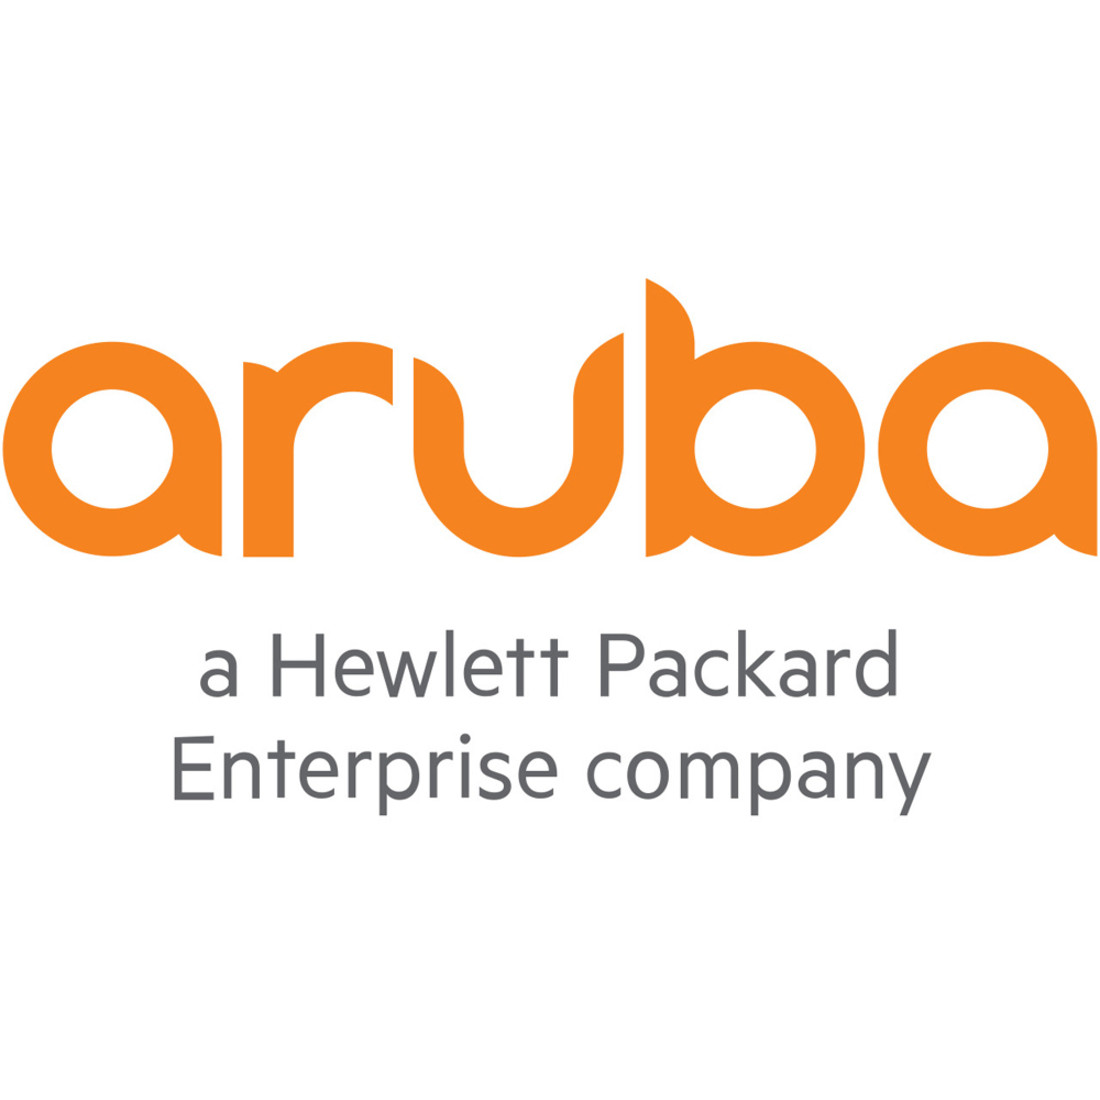 Aruba Foundation Care Hardware Only Extended WarrantyWarranty9 x 5 Next Business DayService DepotExchange HS6D9E